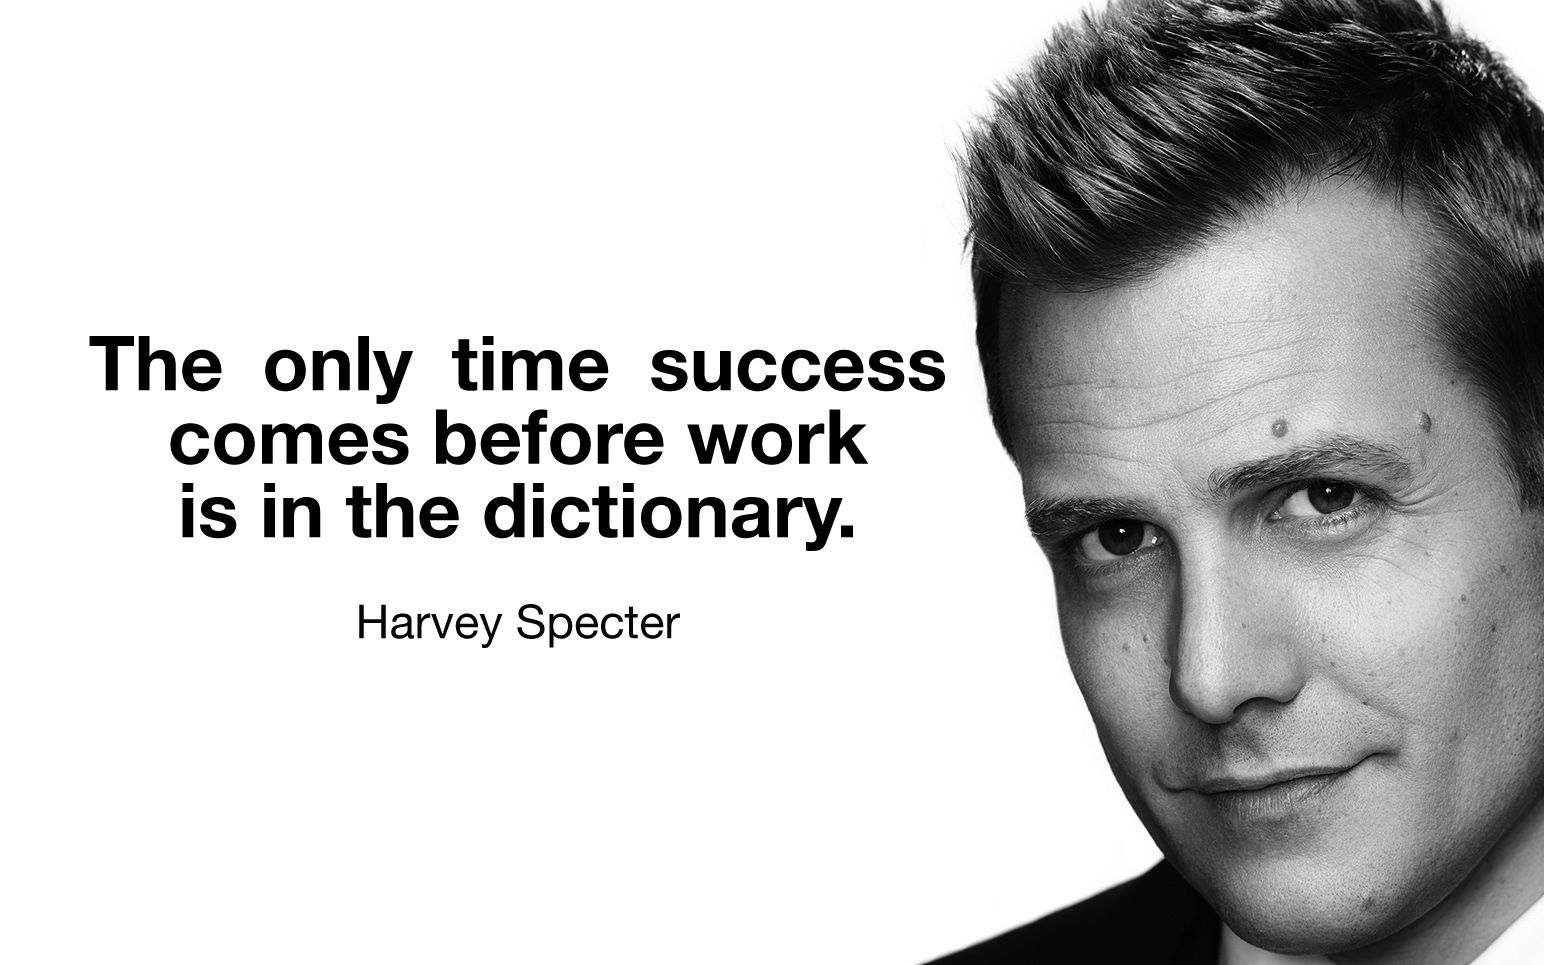 Harvey Specter quotes to help you win at life and entrepreneurship